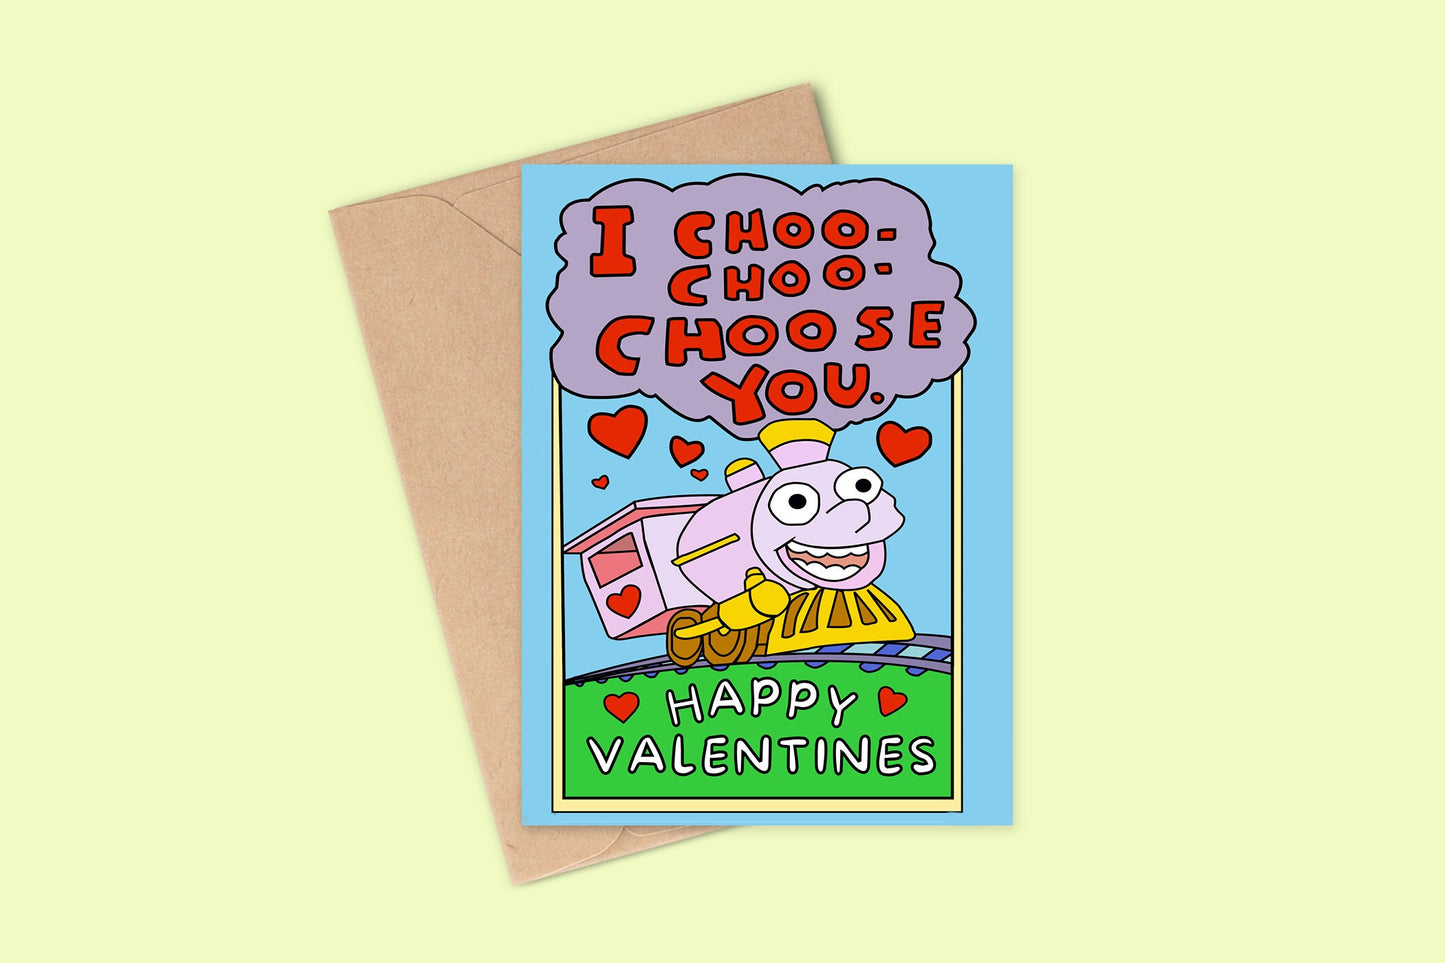 Funny Valentines Day Card For Him or Her, The Simpsons Inspired, Funny Card, Valentines card, Funny Valentines Cards, I Choo Choo Chose you